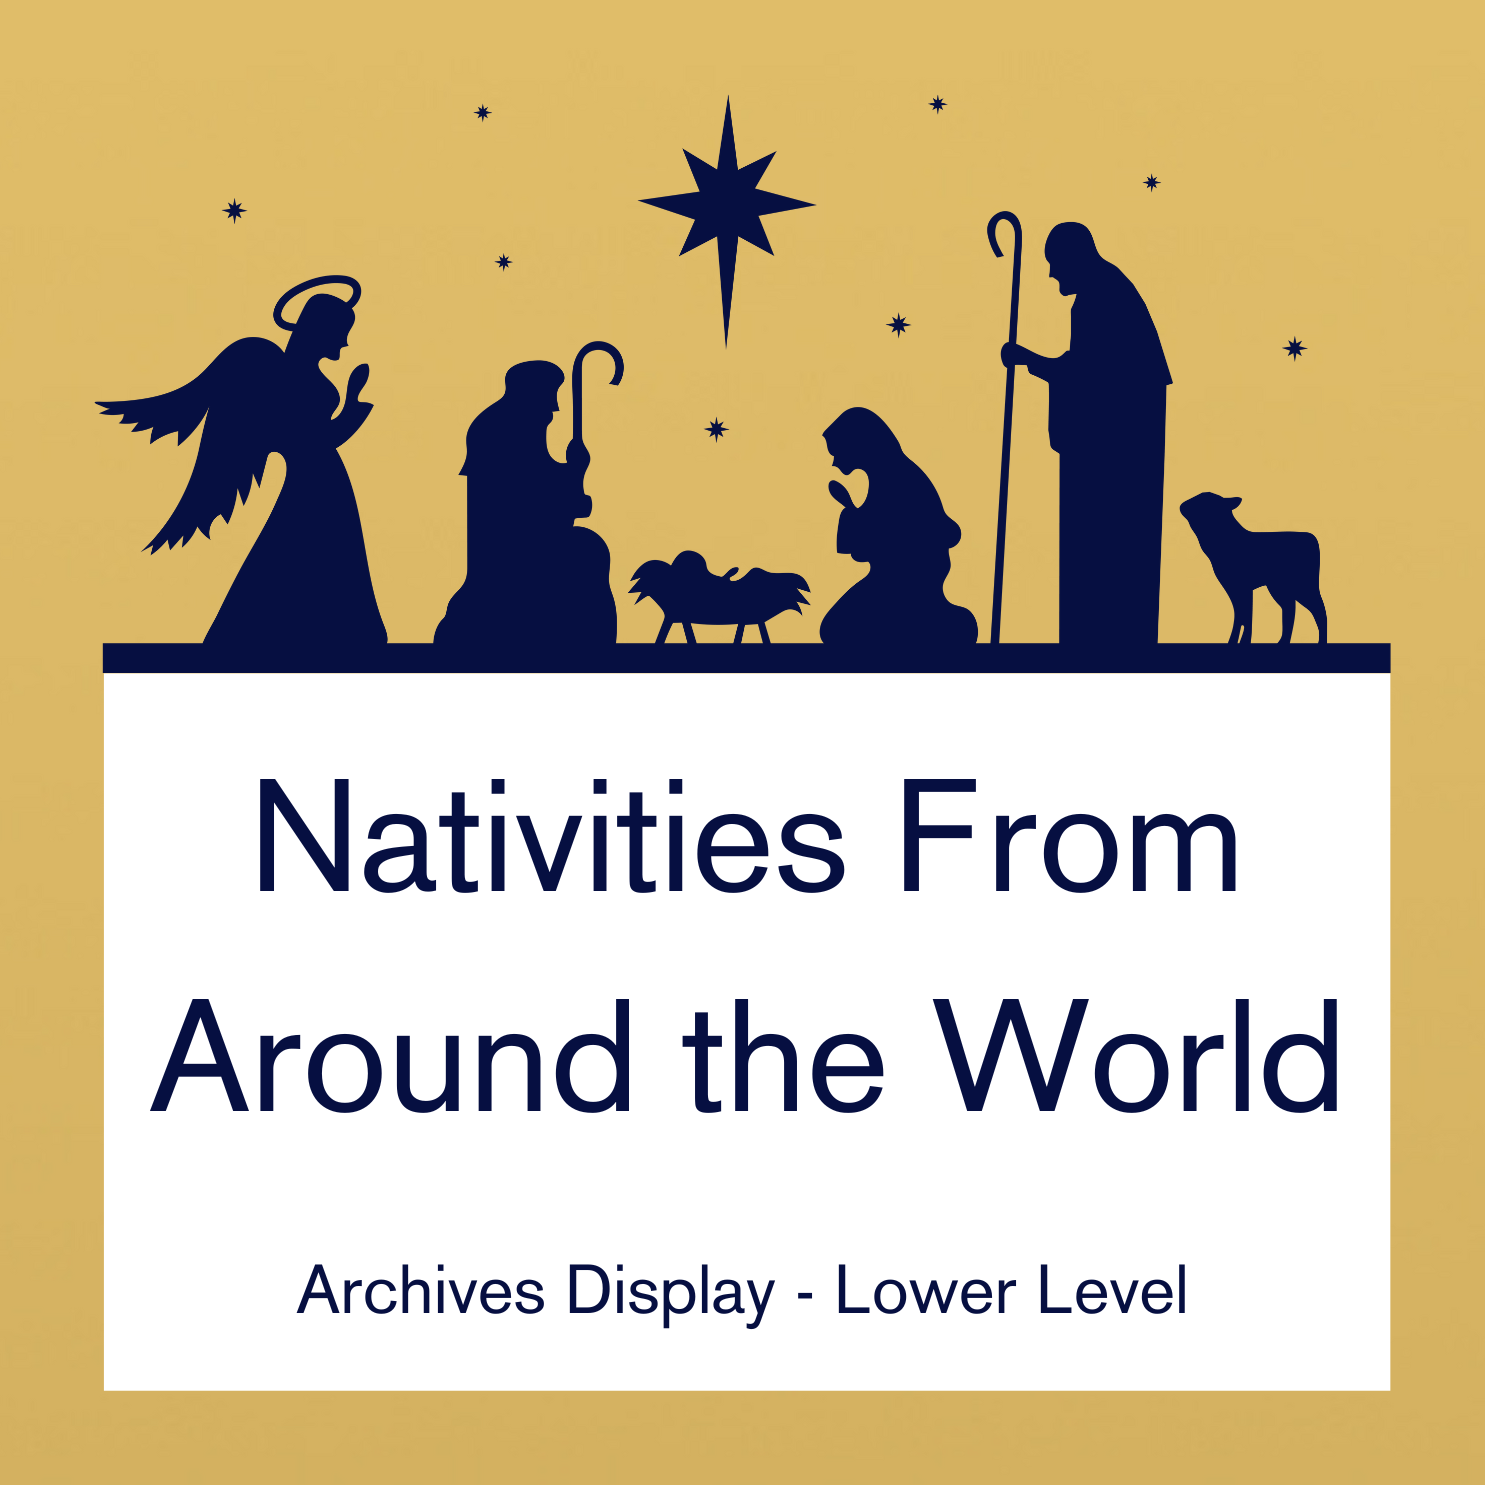 Nativities From Around the World - Archives Display - Lower Level